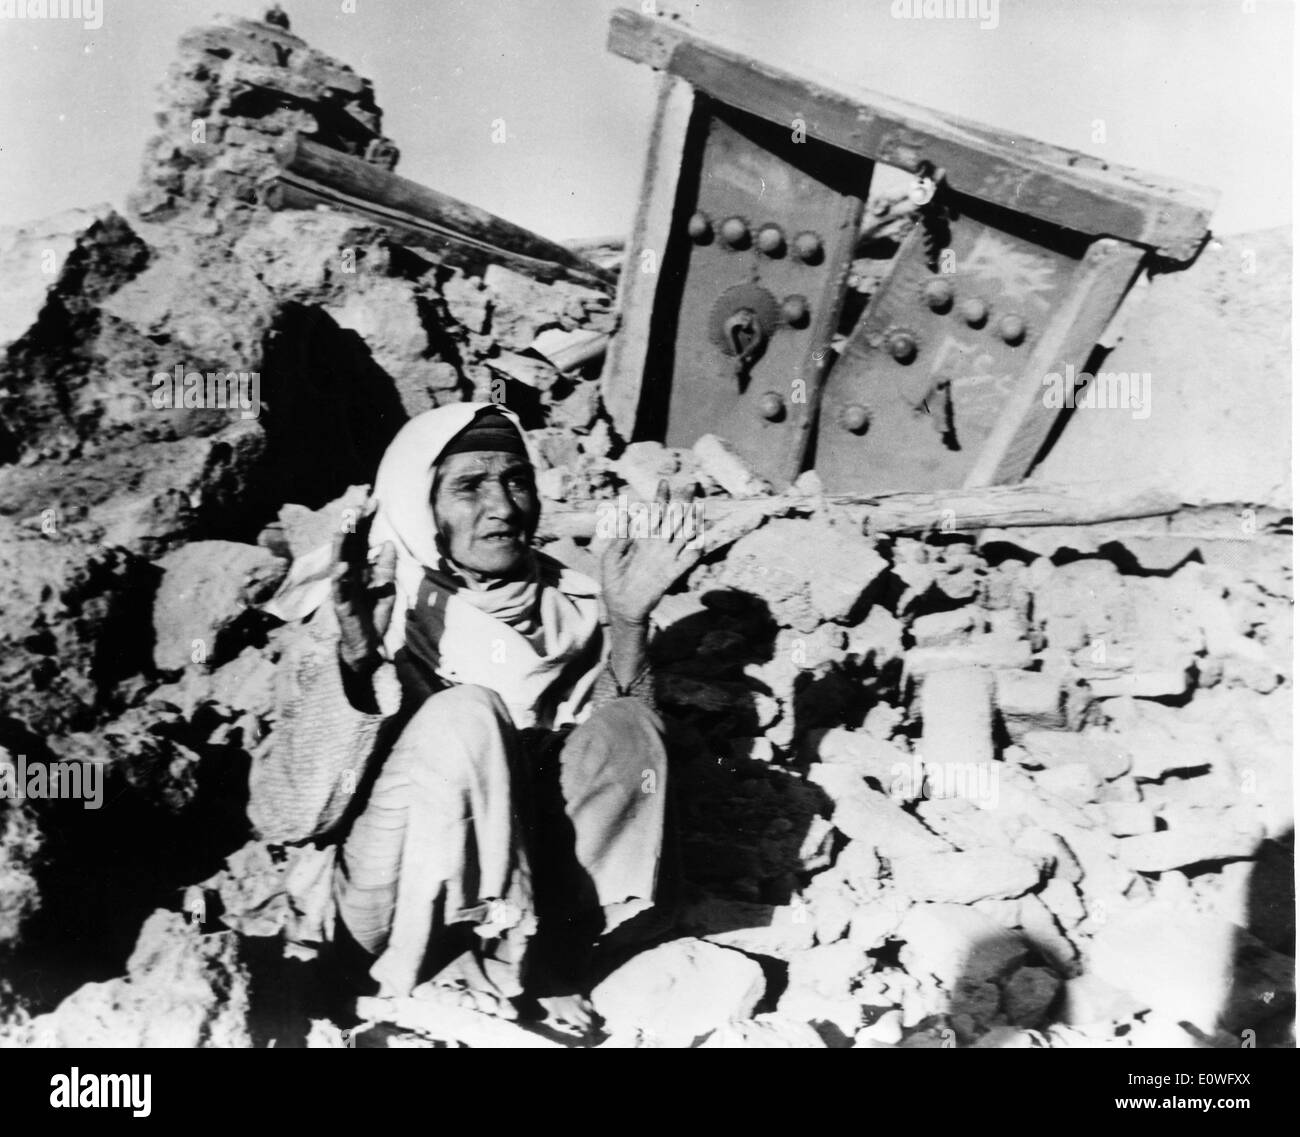 FILE PHOTO - Sep. 5, 1962 - Qazvin, Iran - A man seated on the rubble of his destroyed home near Tehran describes what happened Stock Photo